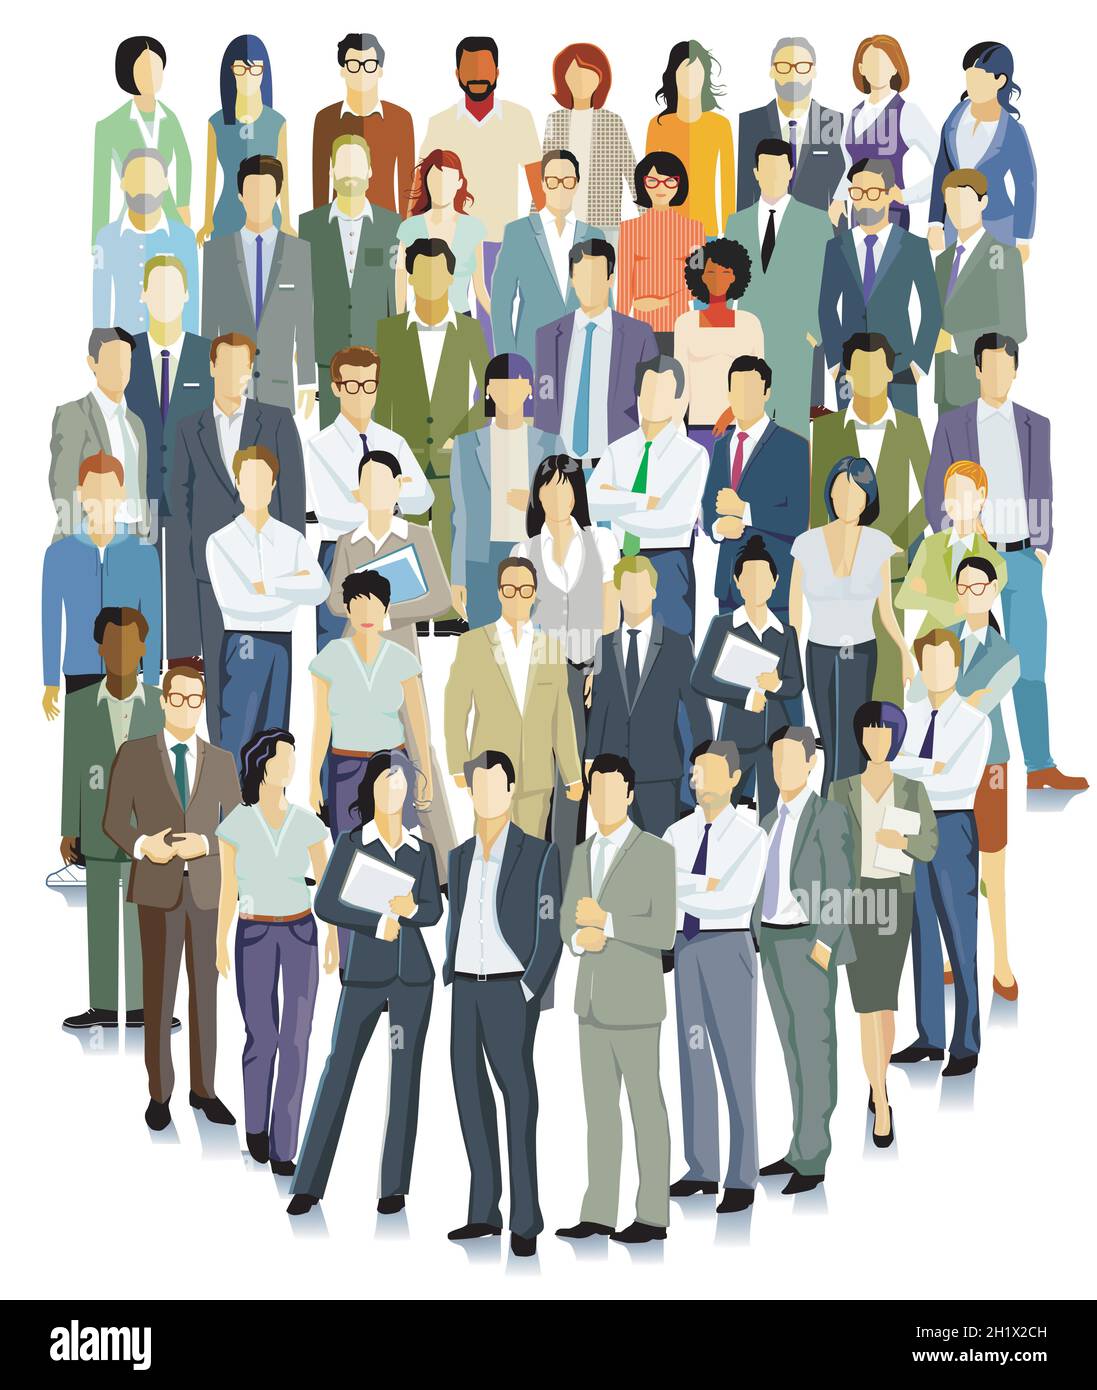 Business people standing together illustration, isolated on white background Stock Vector